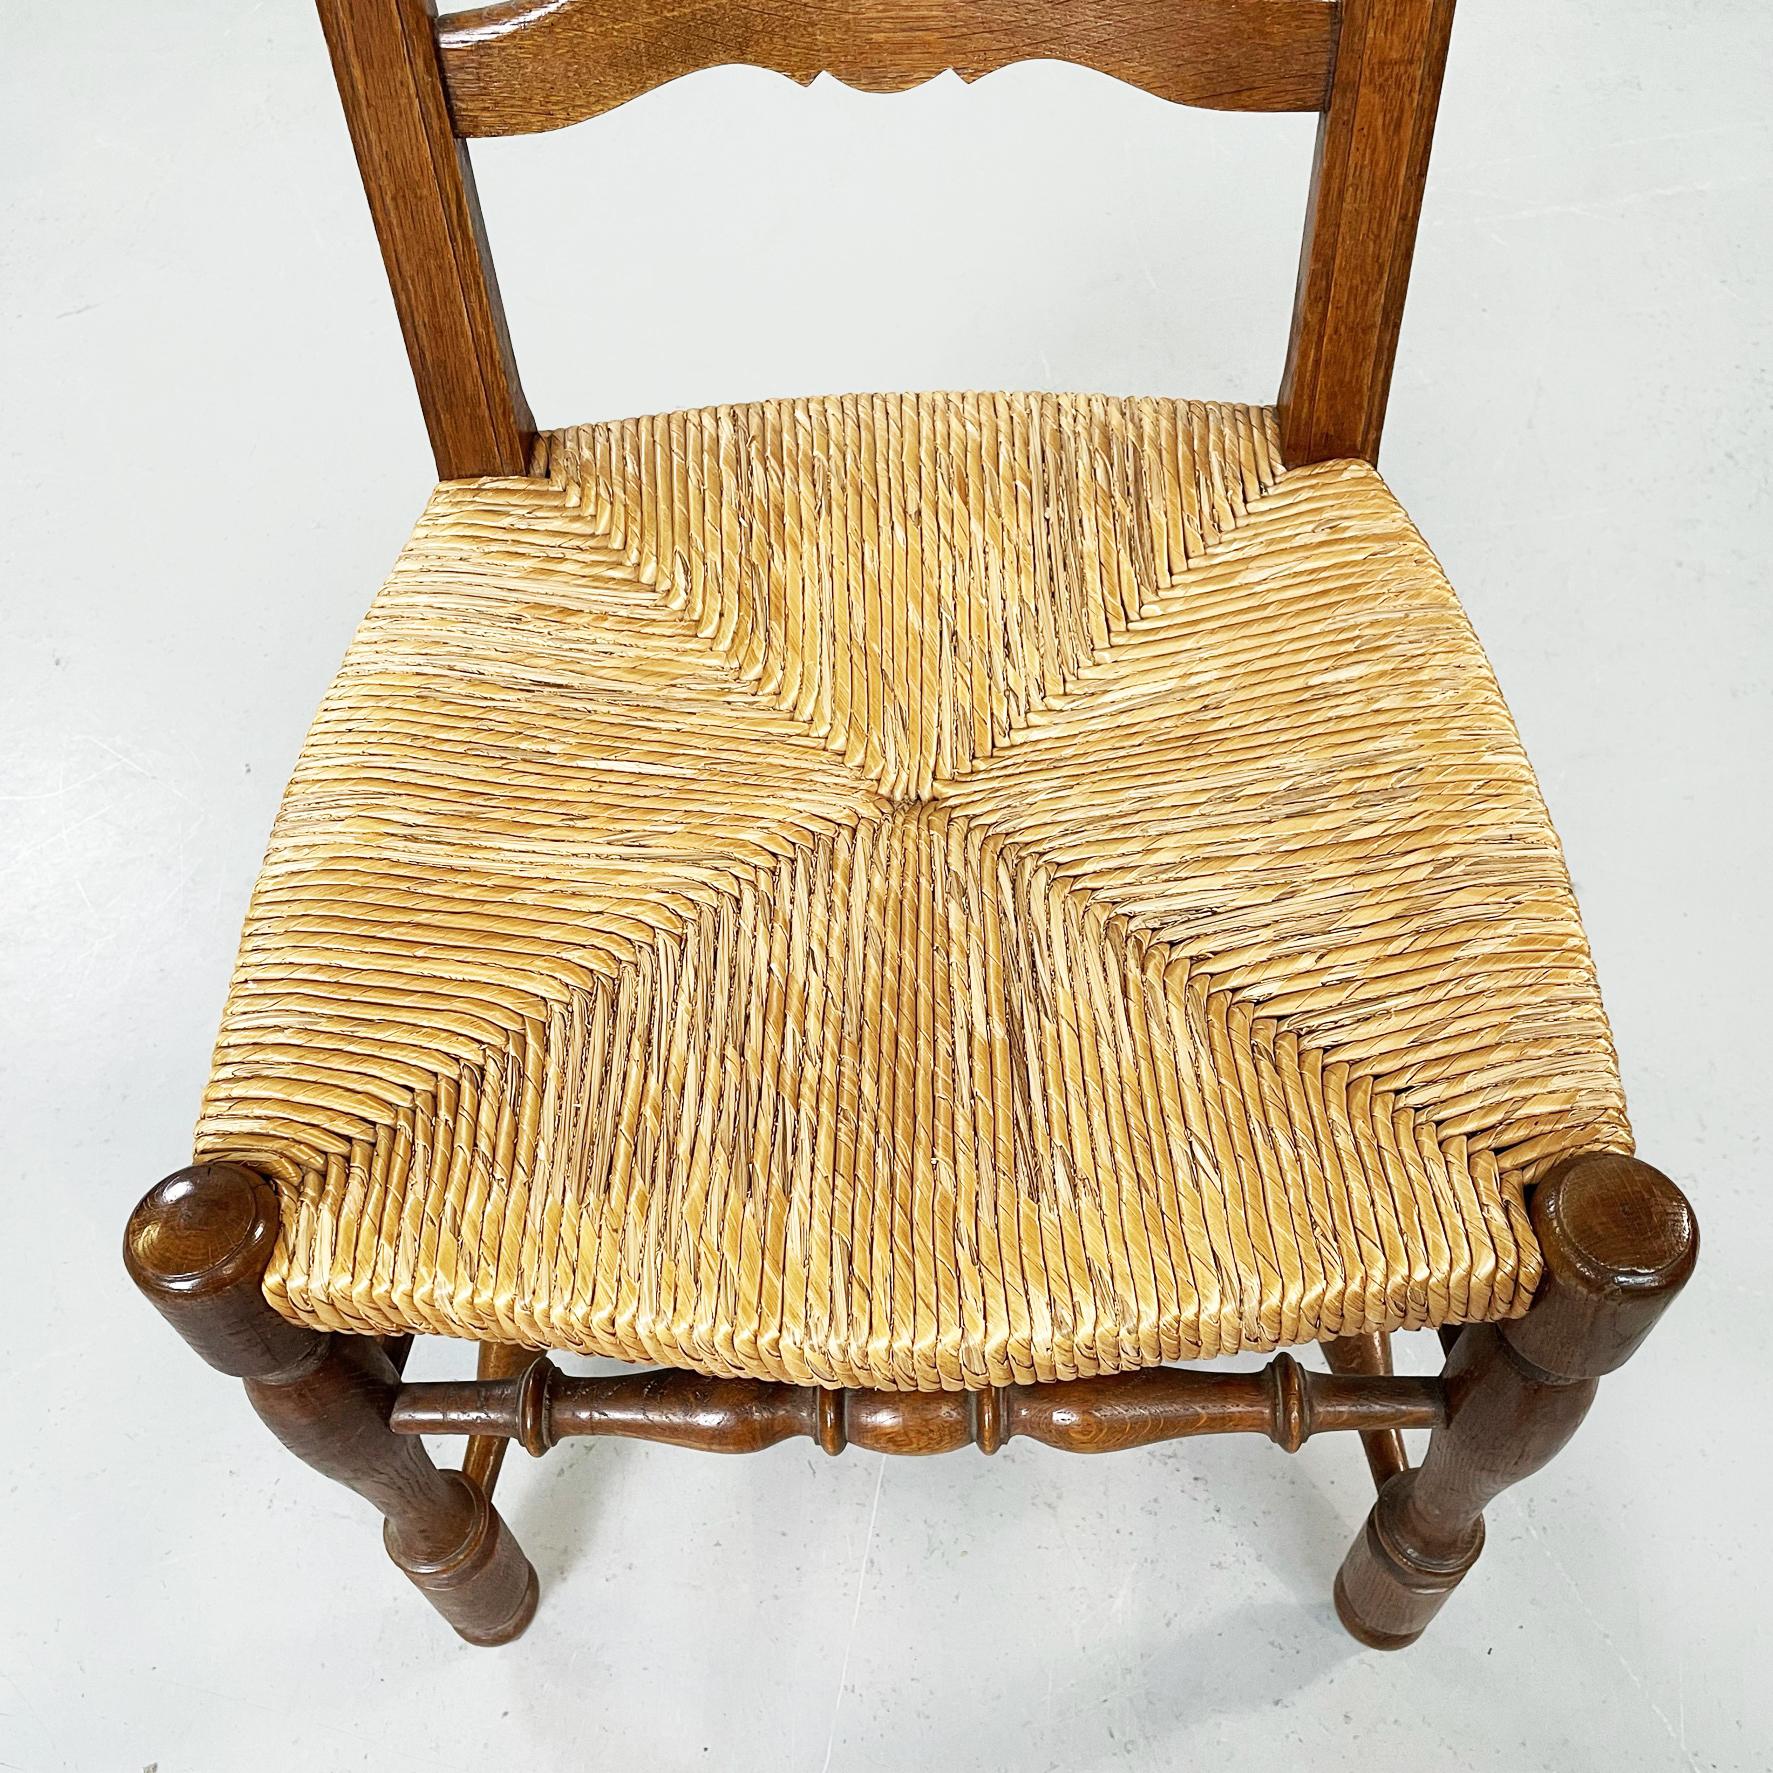 Italian Nineteenth Century Finely Crafted Wooden and Straw Chairs, Late1800s For Sale 2